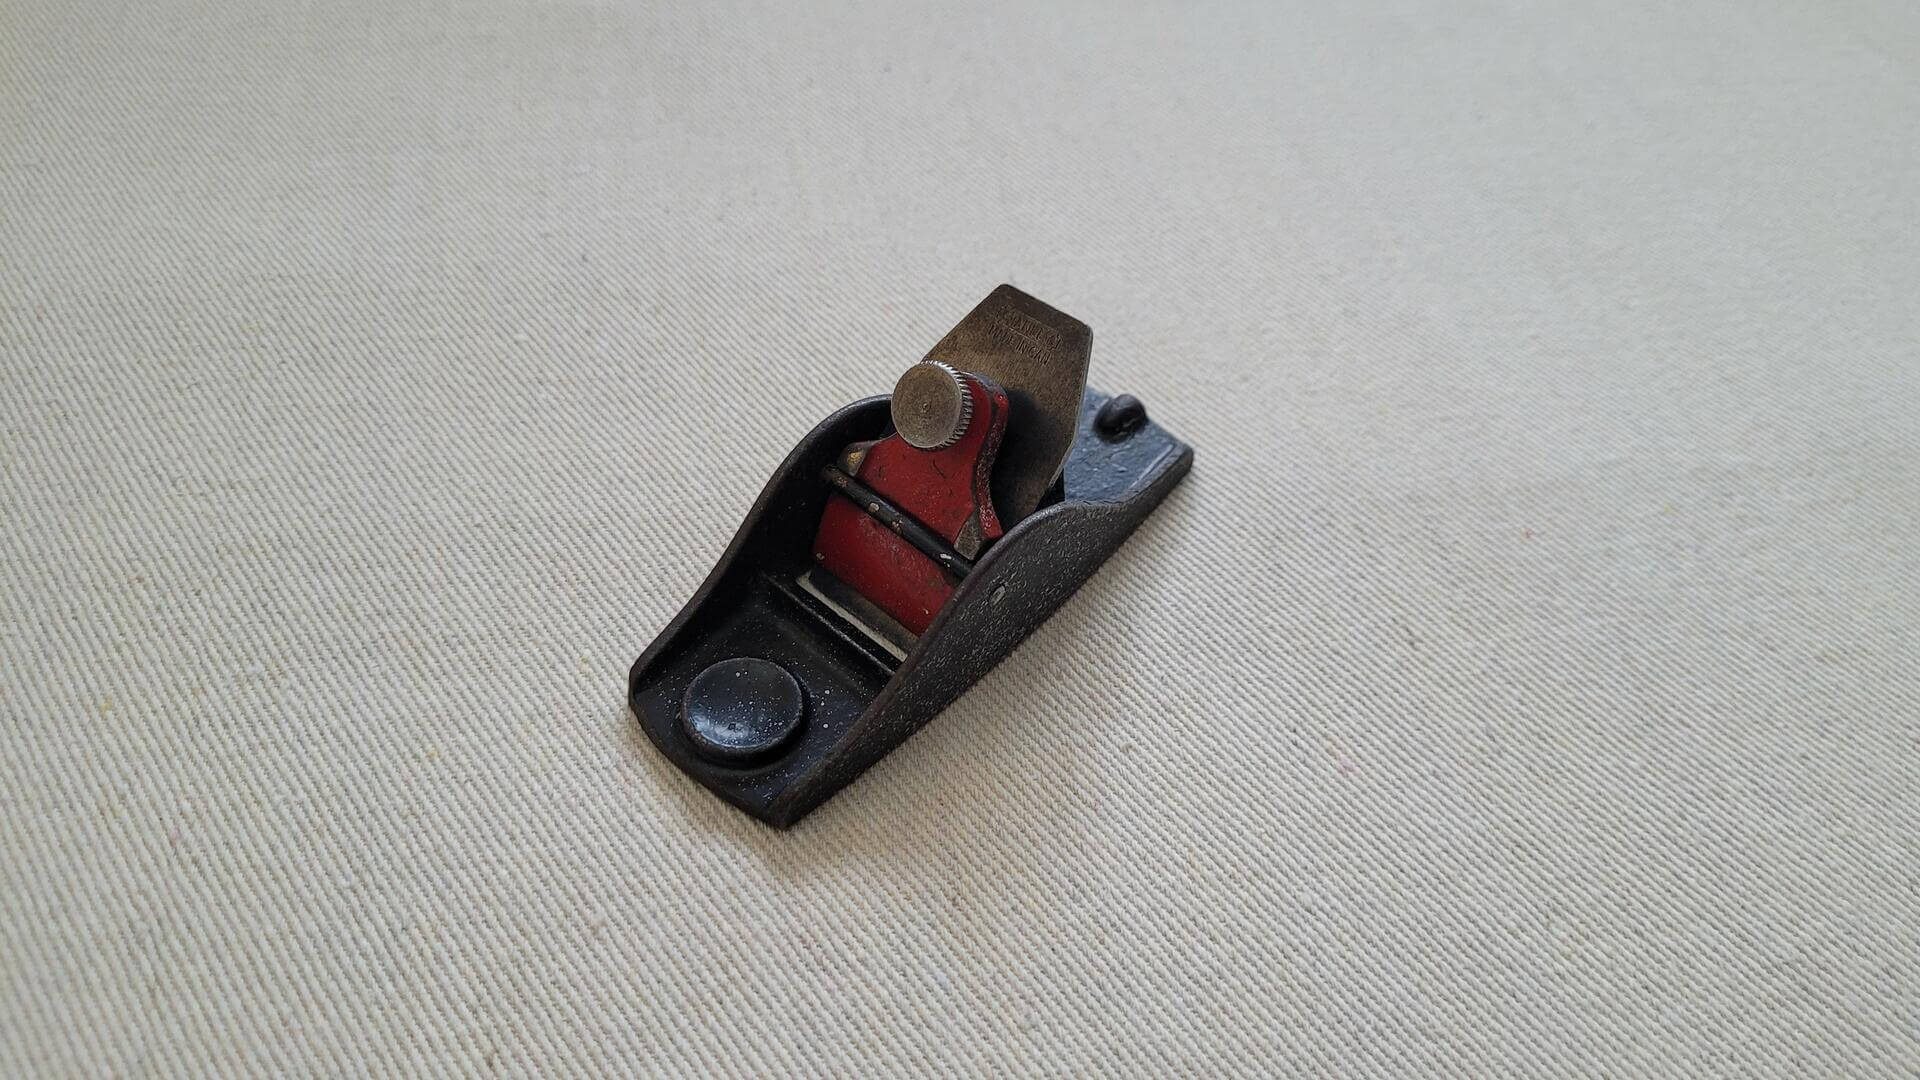 Stanley No 101 block plane, 3 1/2 inches long, 1 inch cutter, cast iron, japanned finish. Rare made in Canada Stanley vintage collectible miniature block plane for fine woodworking made from 1877-1962